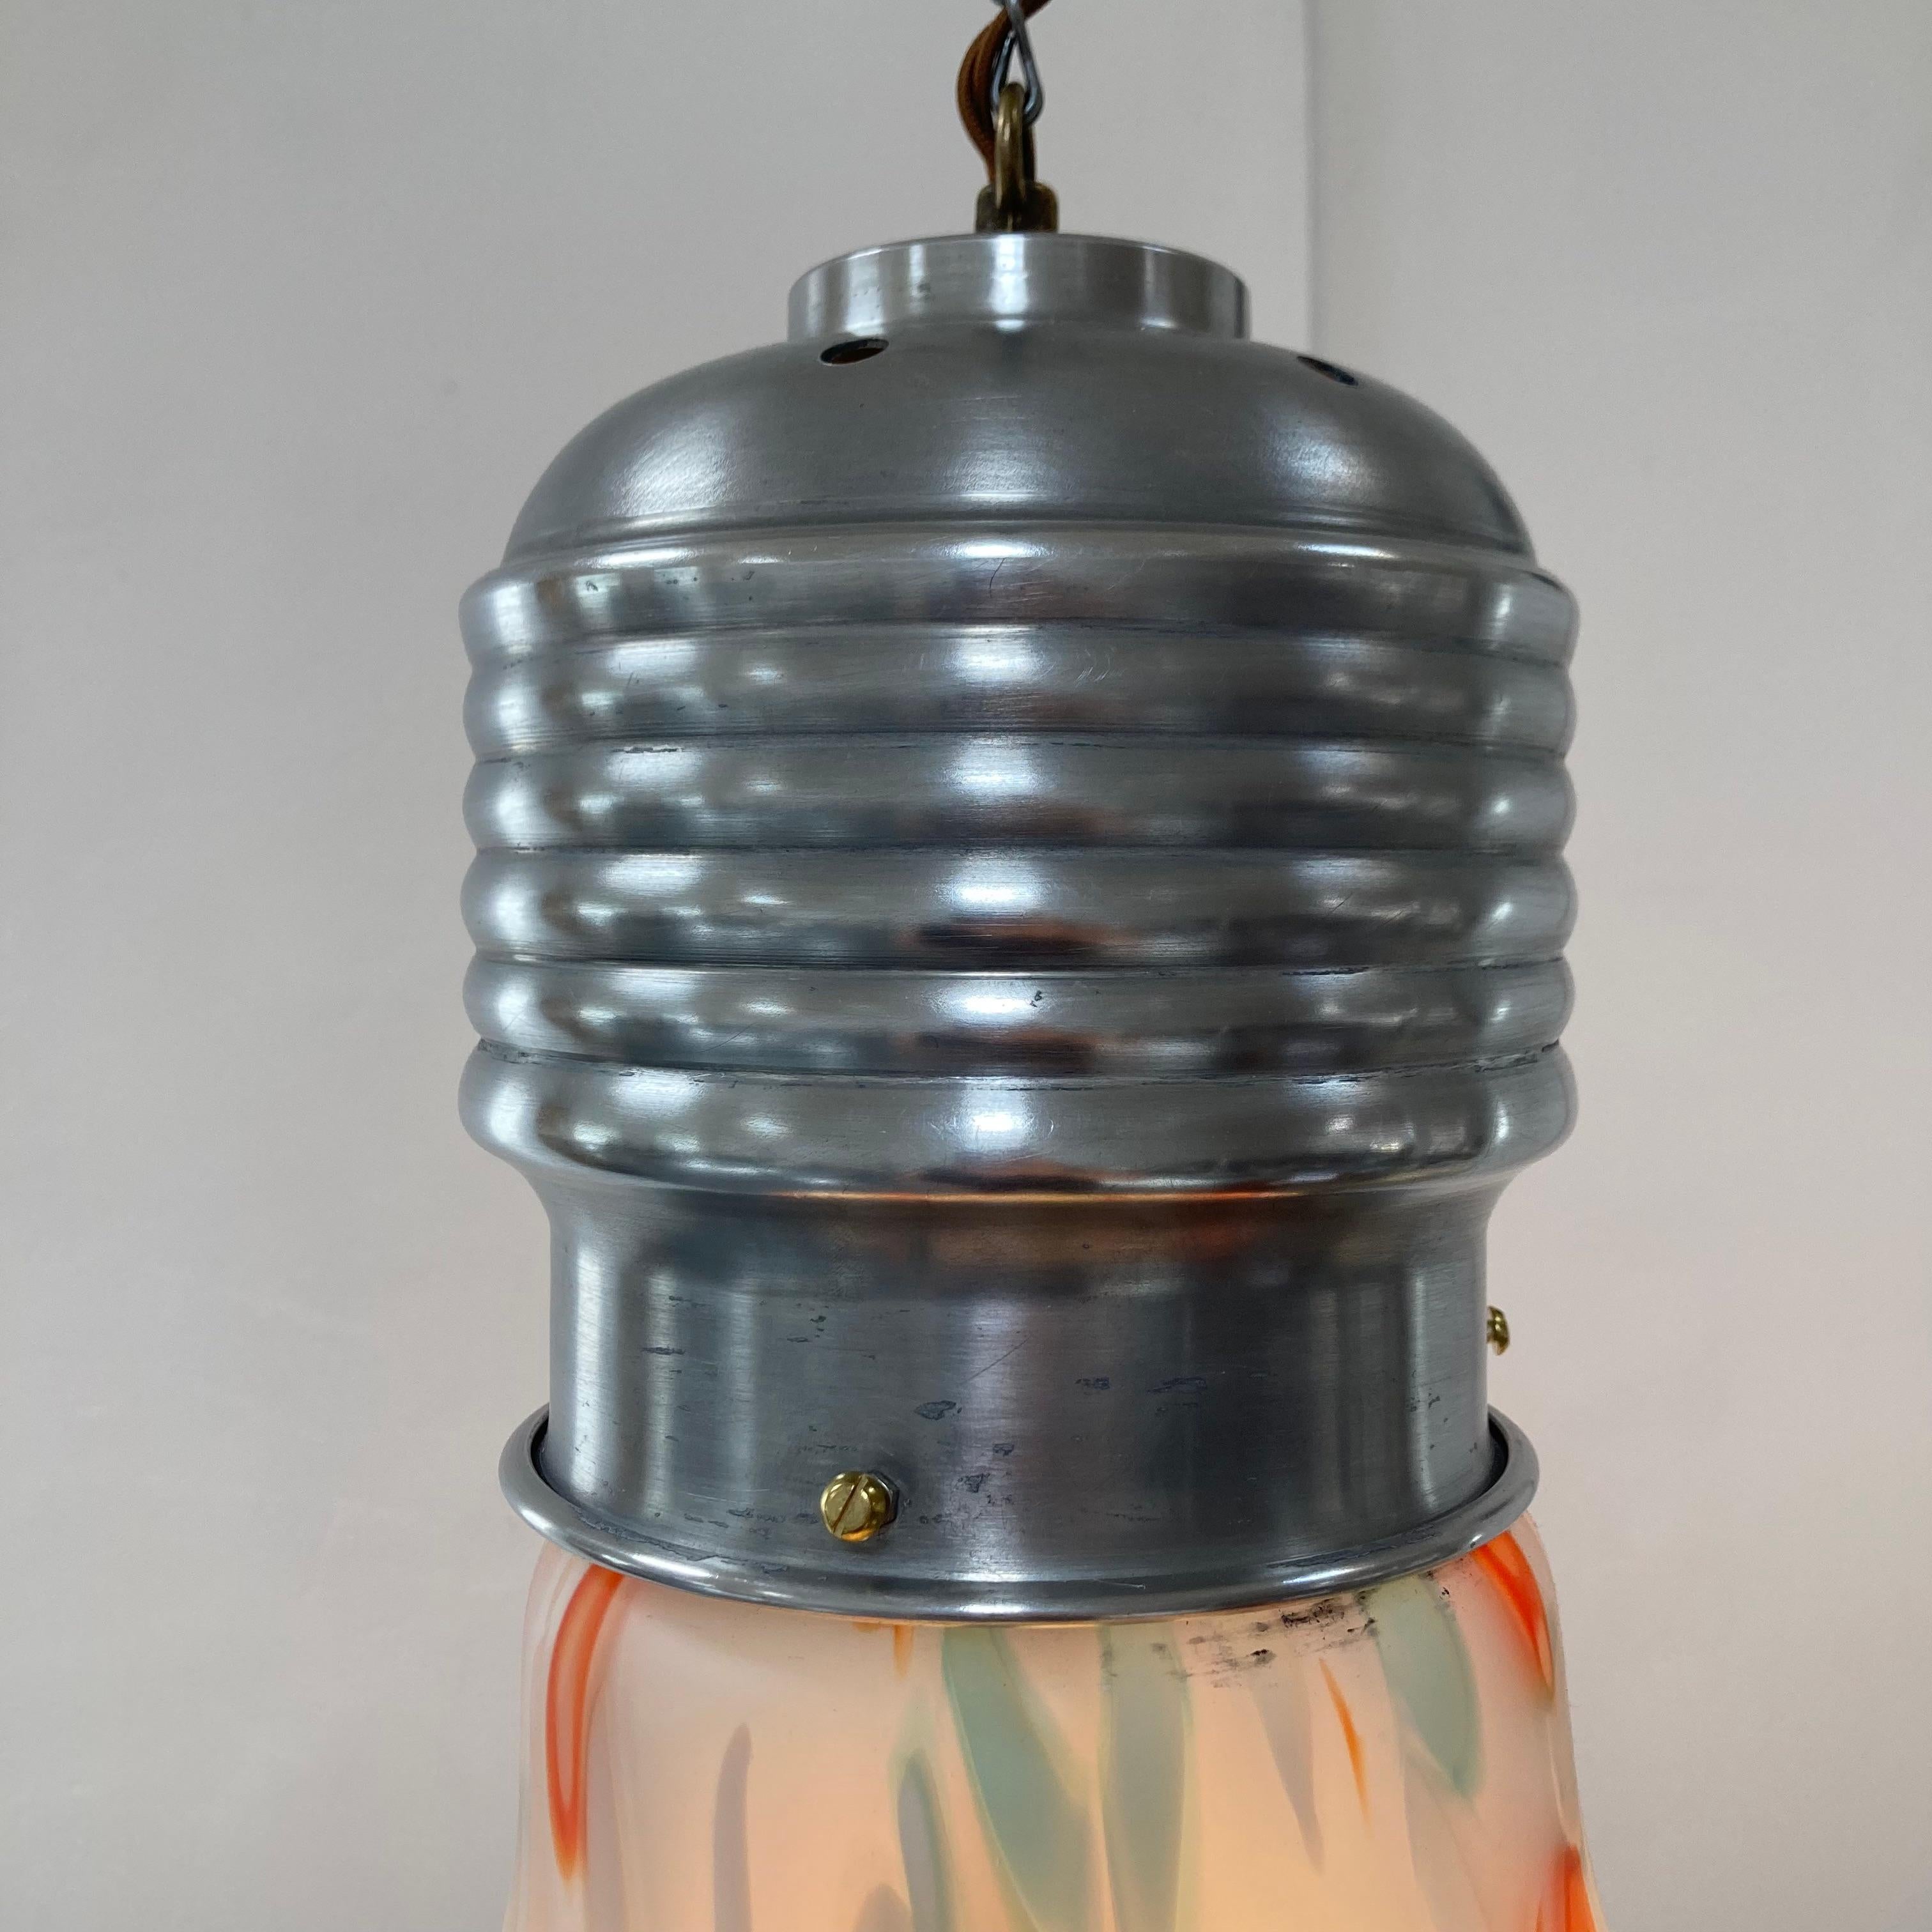 XL Hanging Light Bulb 'Pop Art' Pendant 1980's In Excellent Condition For Sale In Somerton, GB